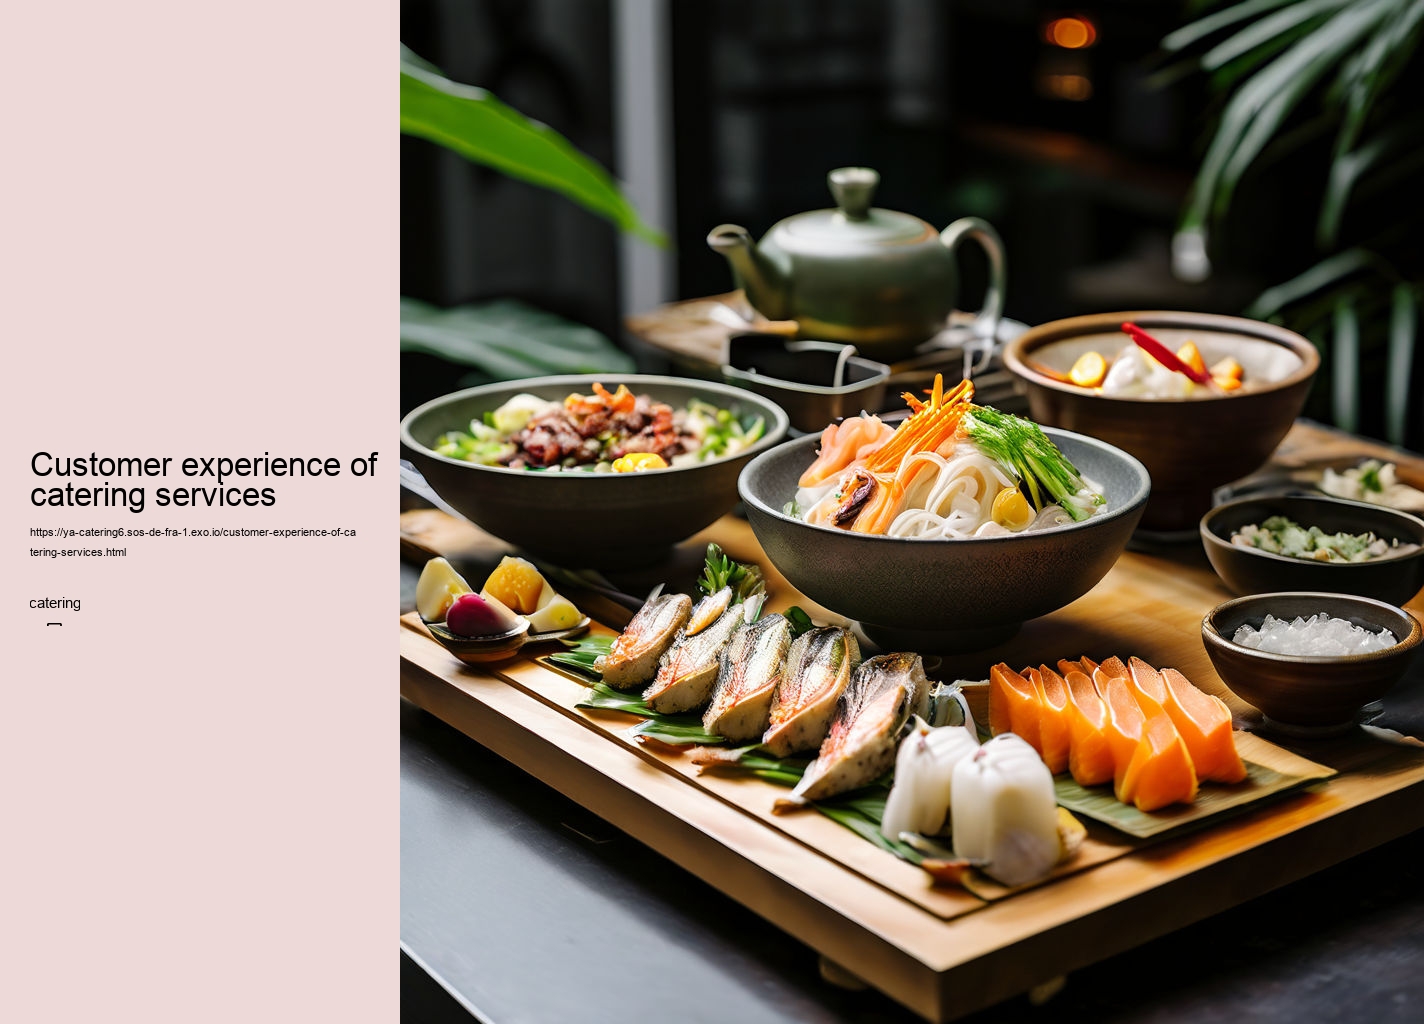 Customer experience of catering services